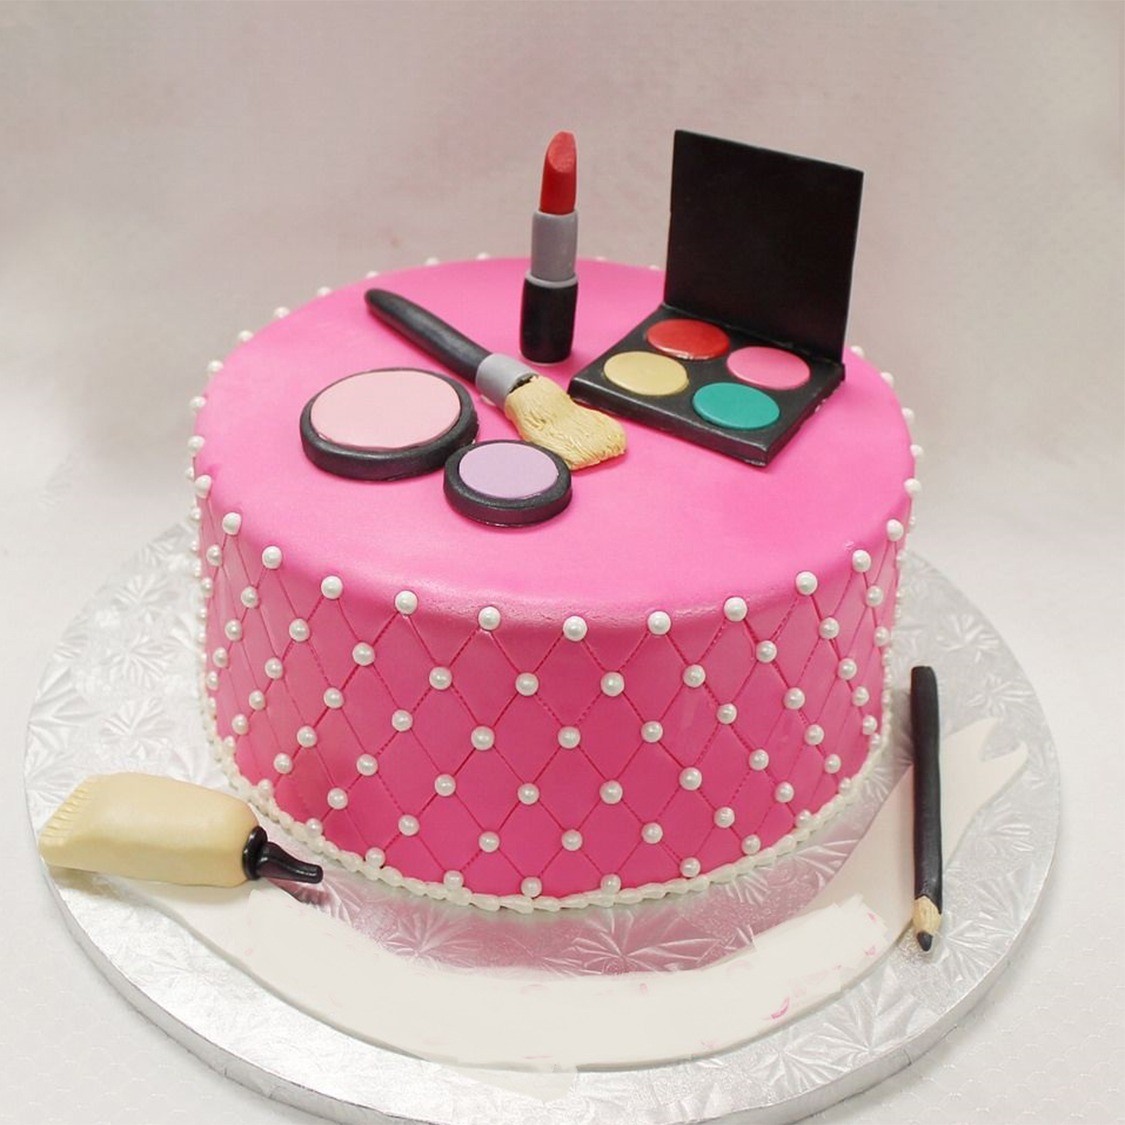 How Is Daughter's day Celebrated - CakeZone - CakeZone